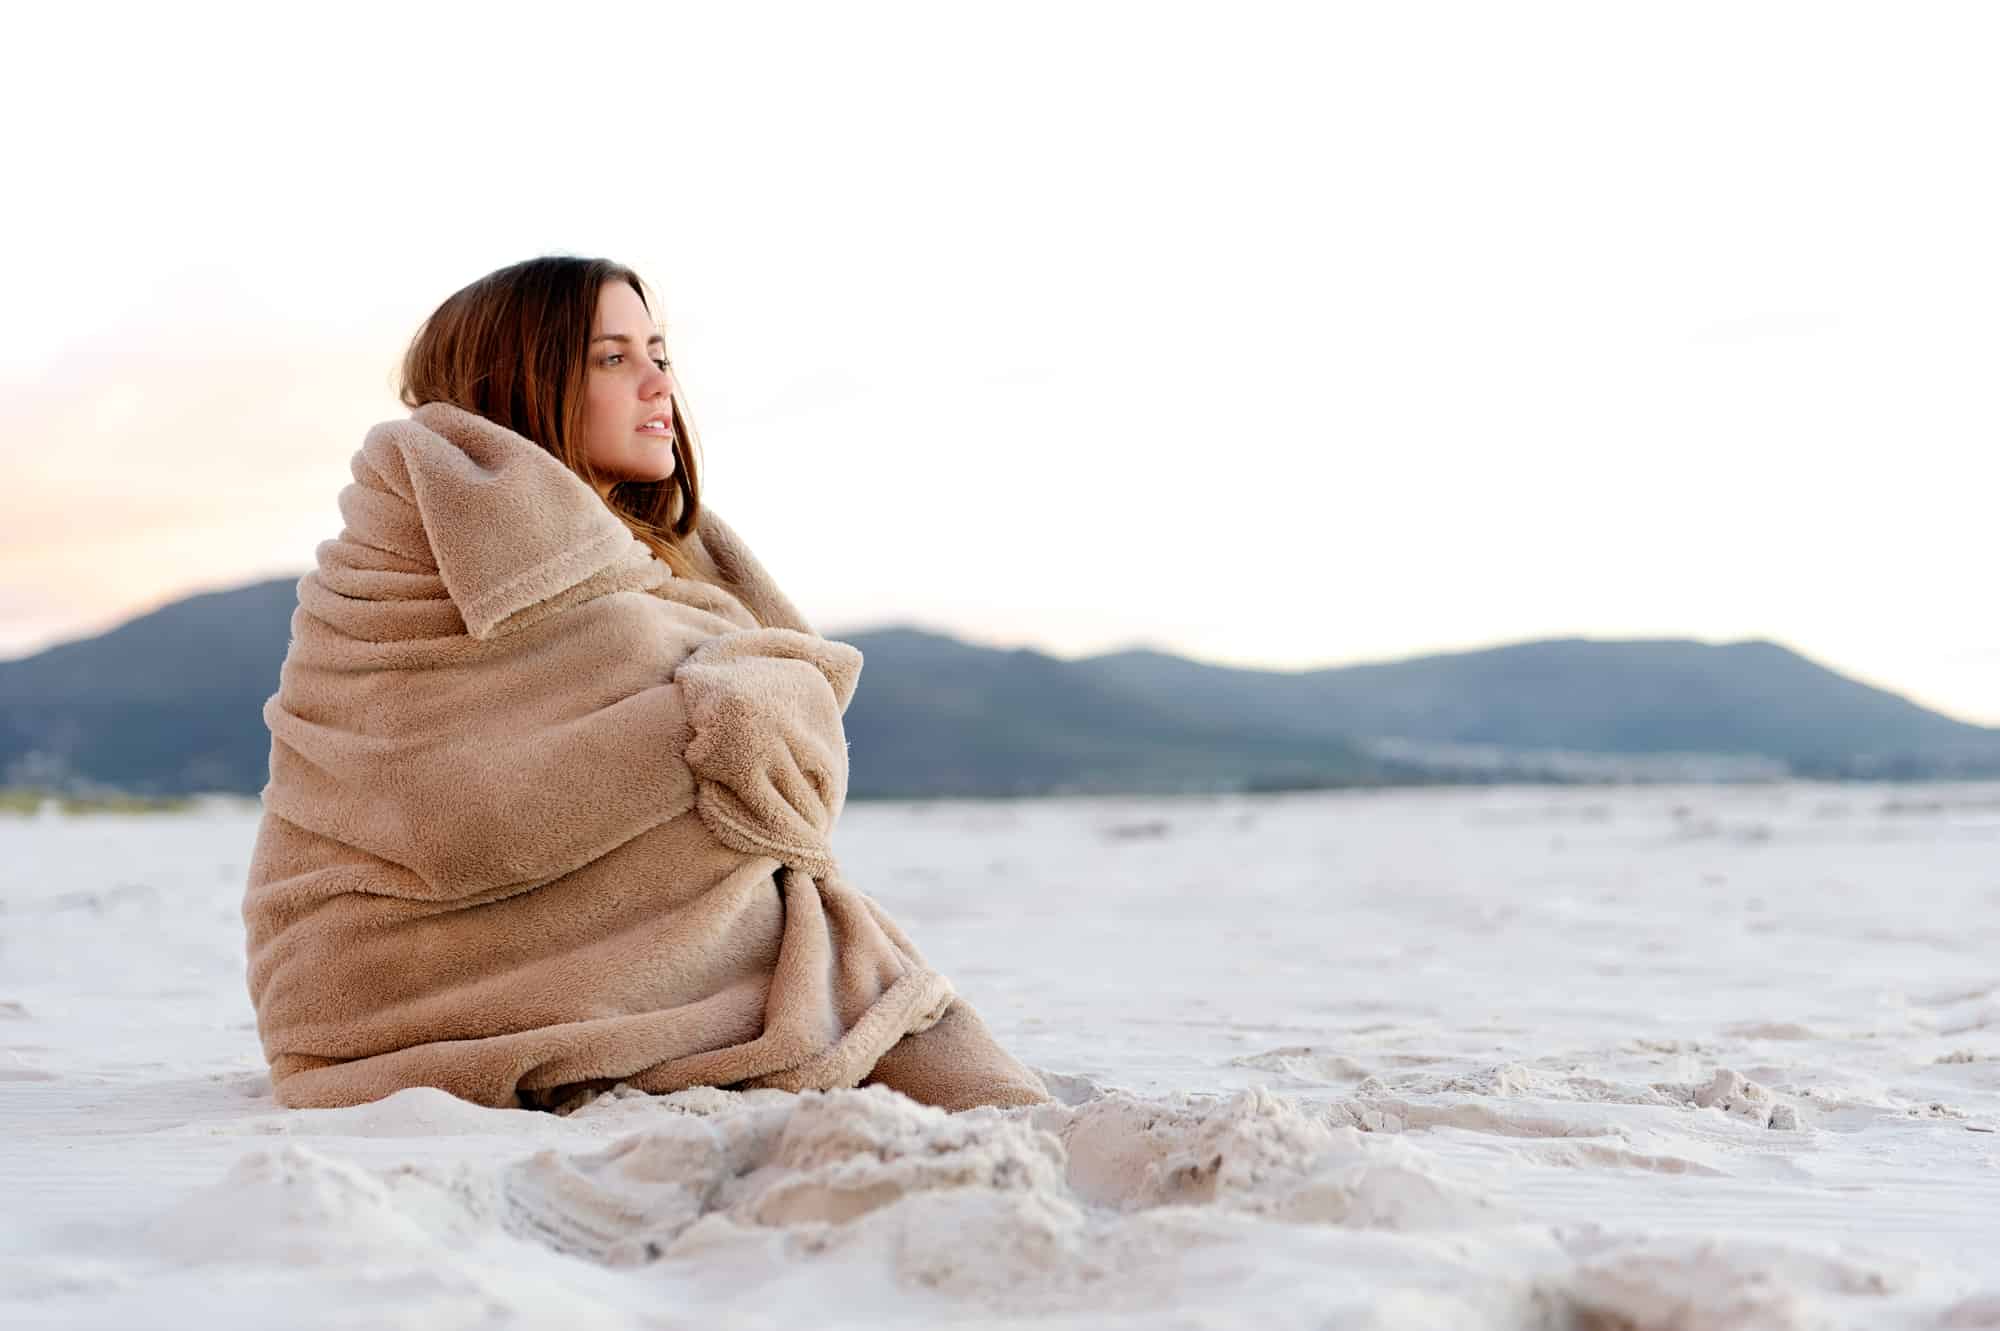 Can Deep Pressure Therapy (DPT) by a Weighted Blanket Improve Your